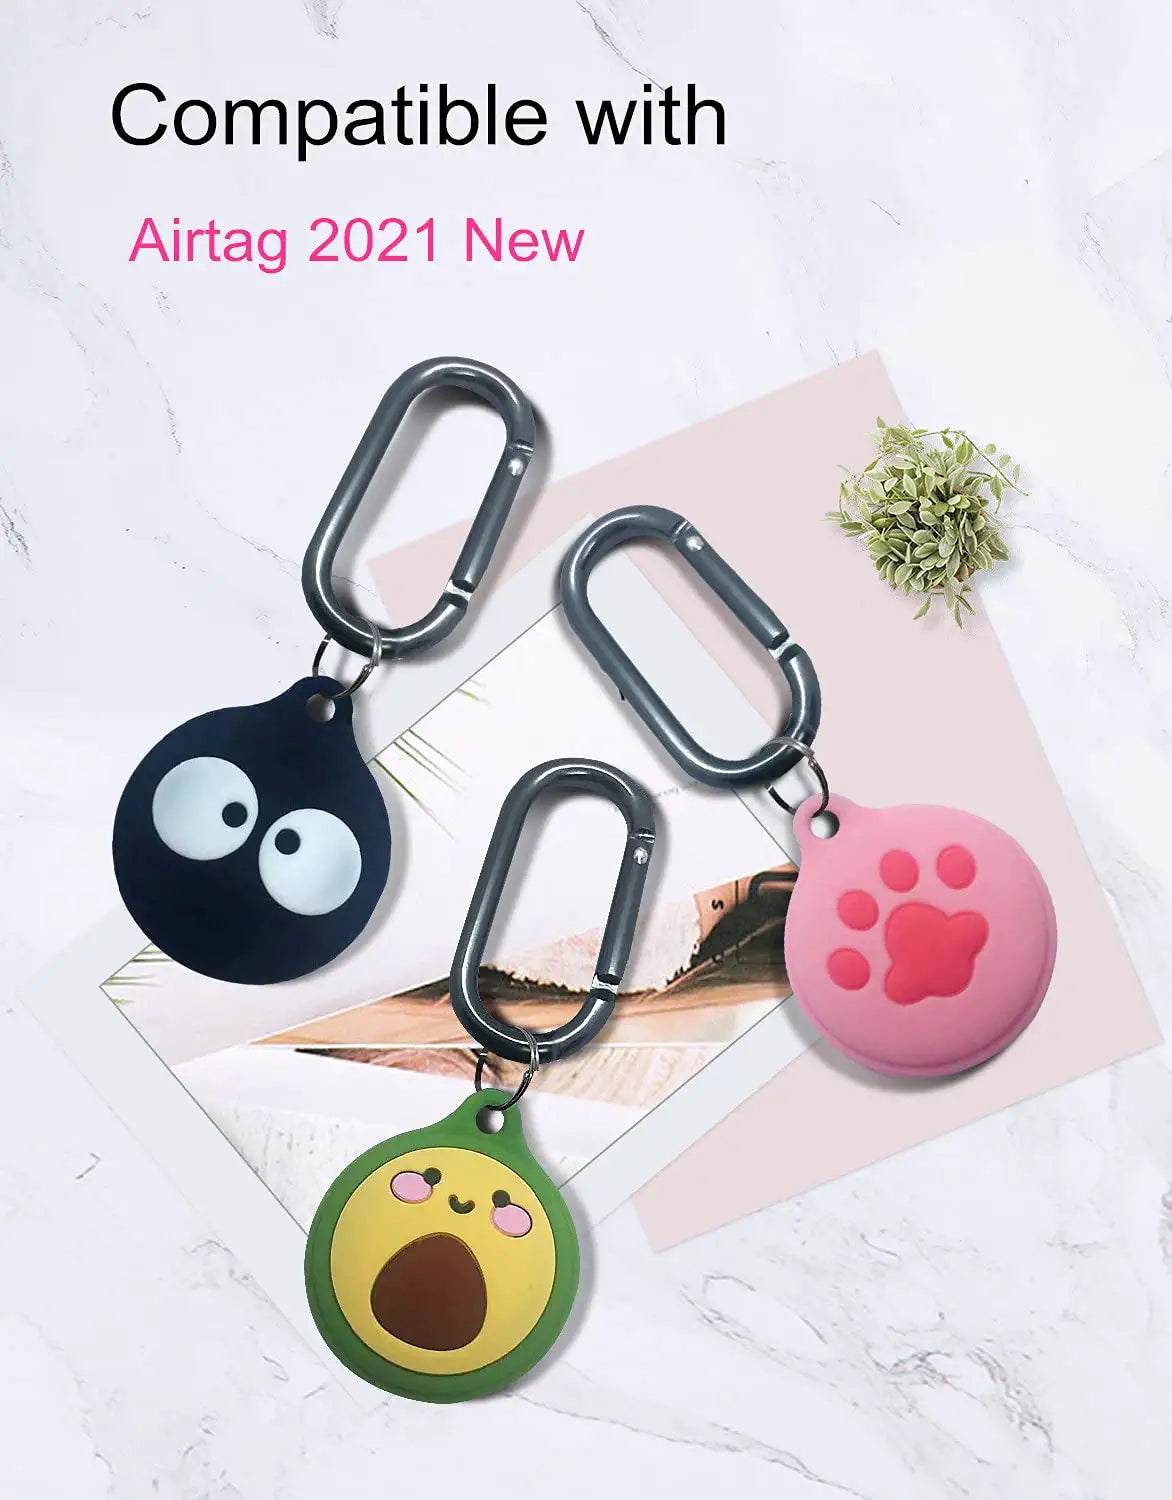 Carrehome 3 Pack Silicone Cases Compatible with Apple Airtag Case, Cute Cartoon Protective Holder for Airtag Keychain,Pet,Luggage,Newest Design